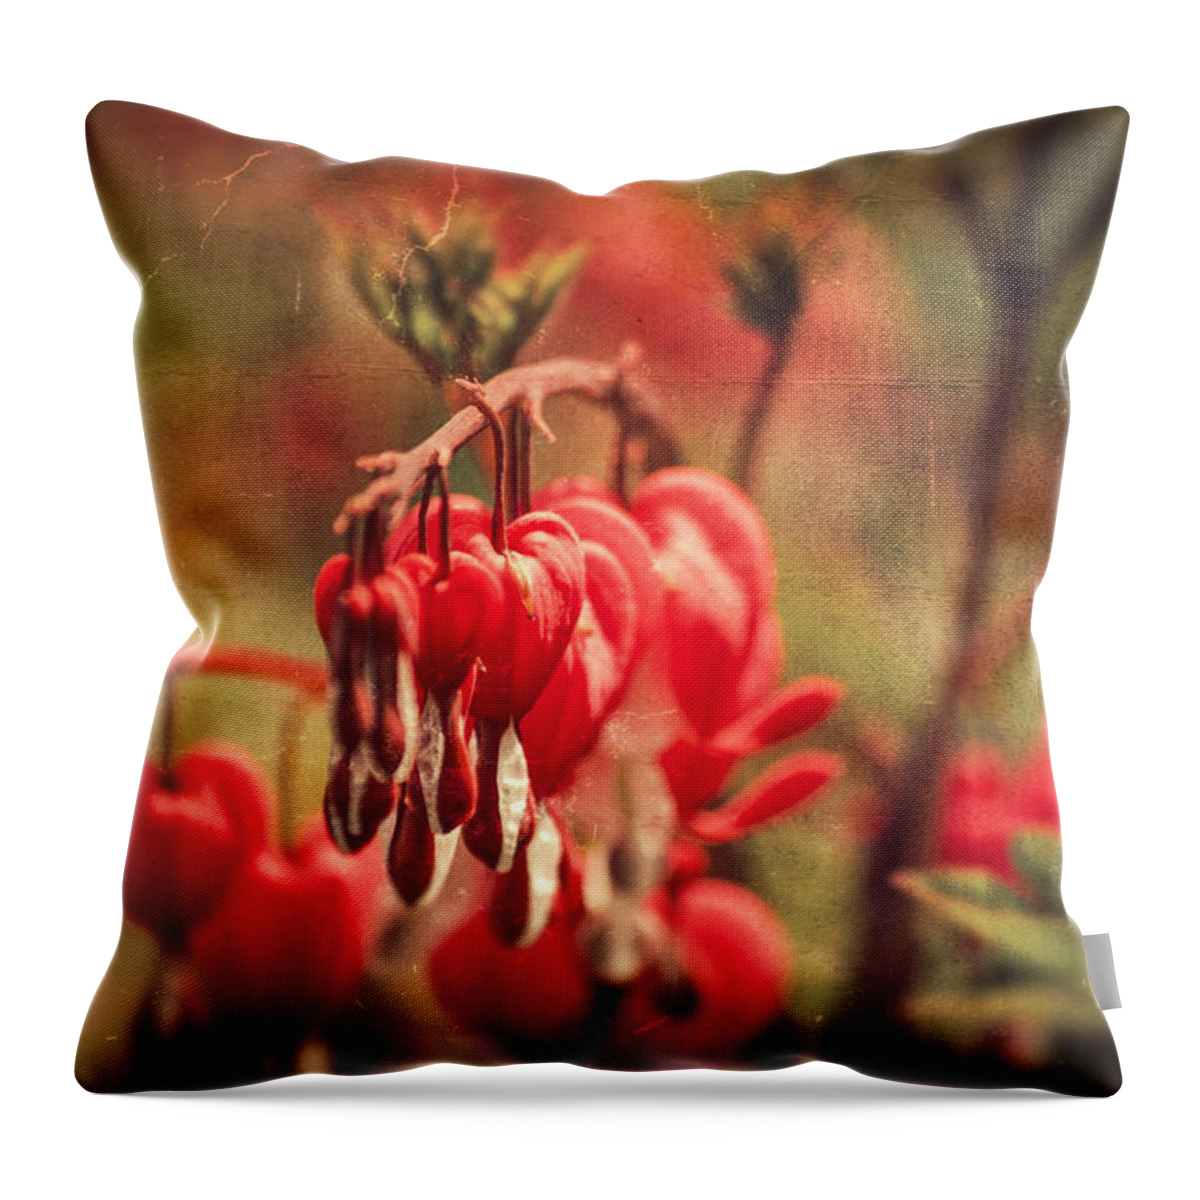 Love Throw Pillow featuring the photograph Bleeding Hearts by Spikey Mouse Photography